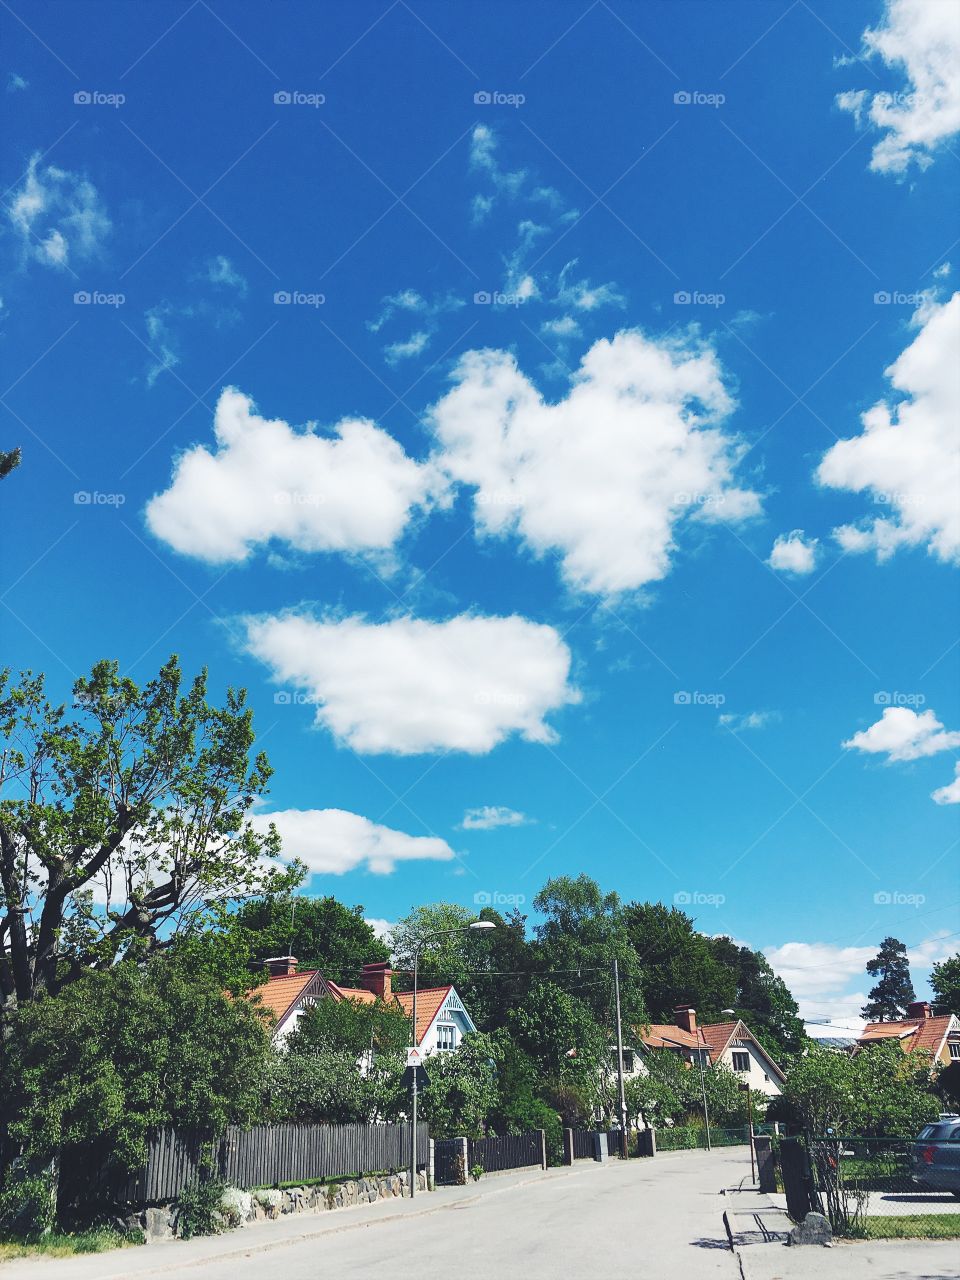 Residential area in Sweden with blue skies